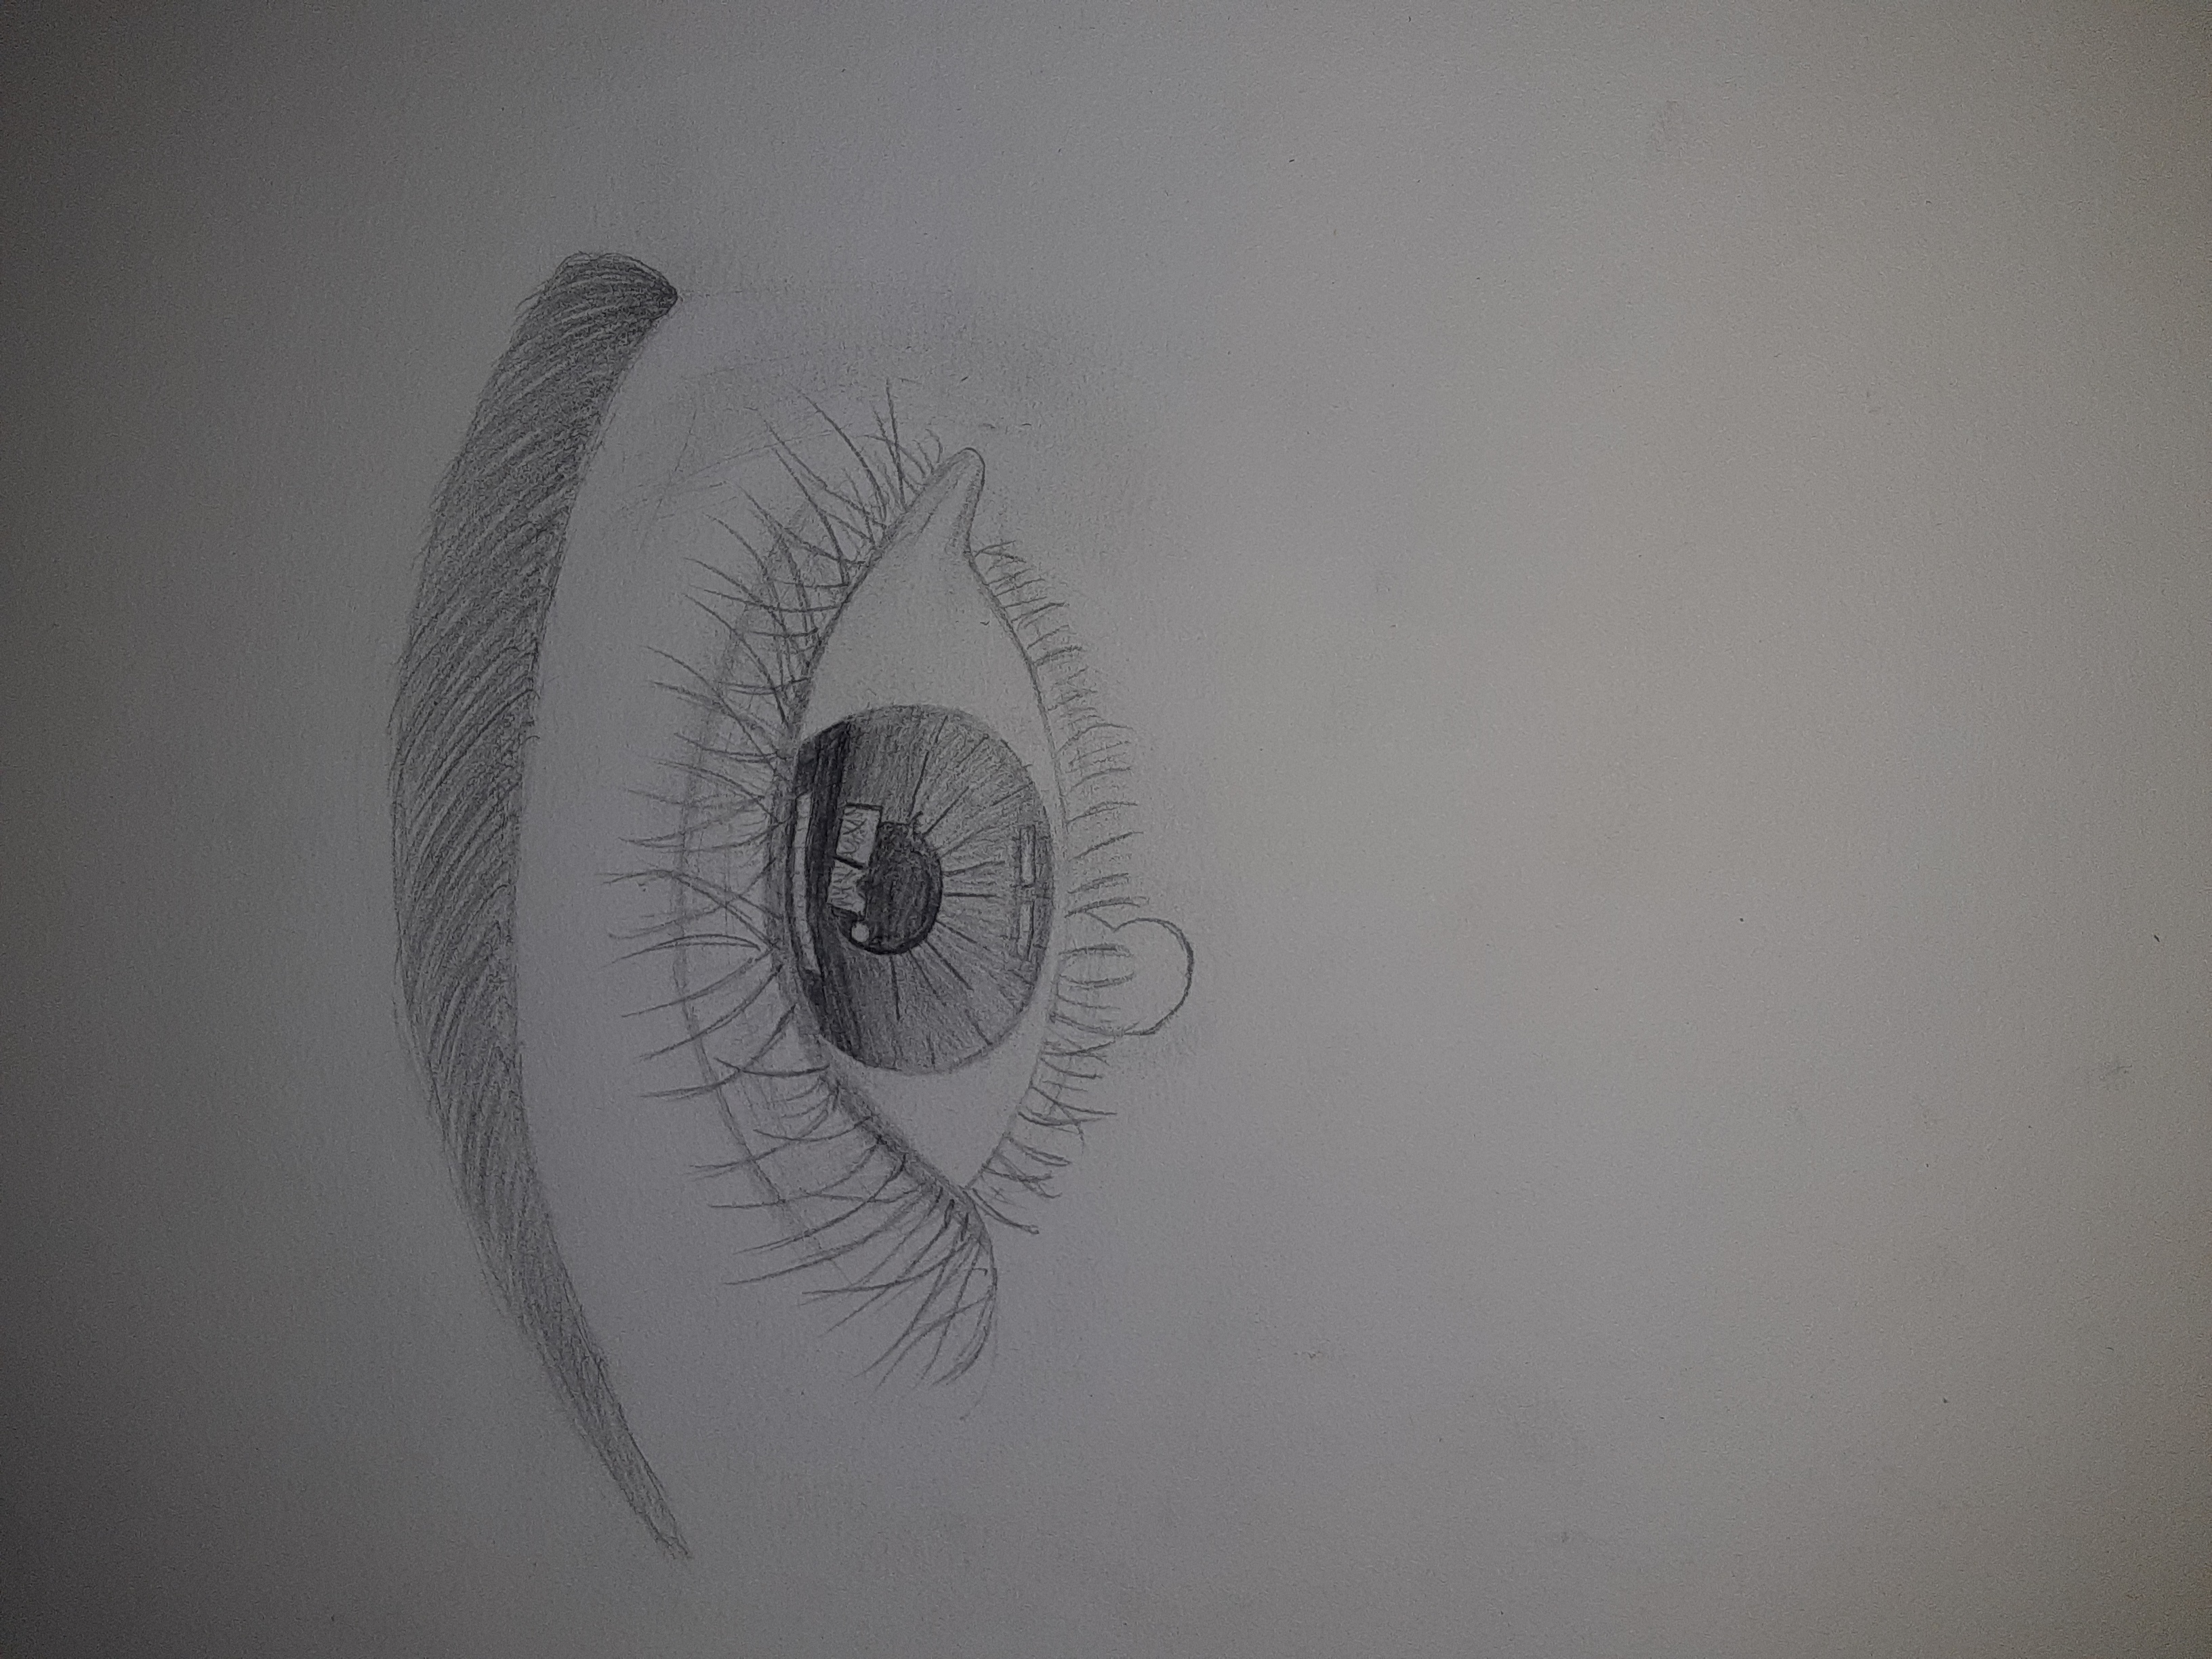 This is a easy pencil sketch of an eye